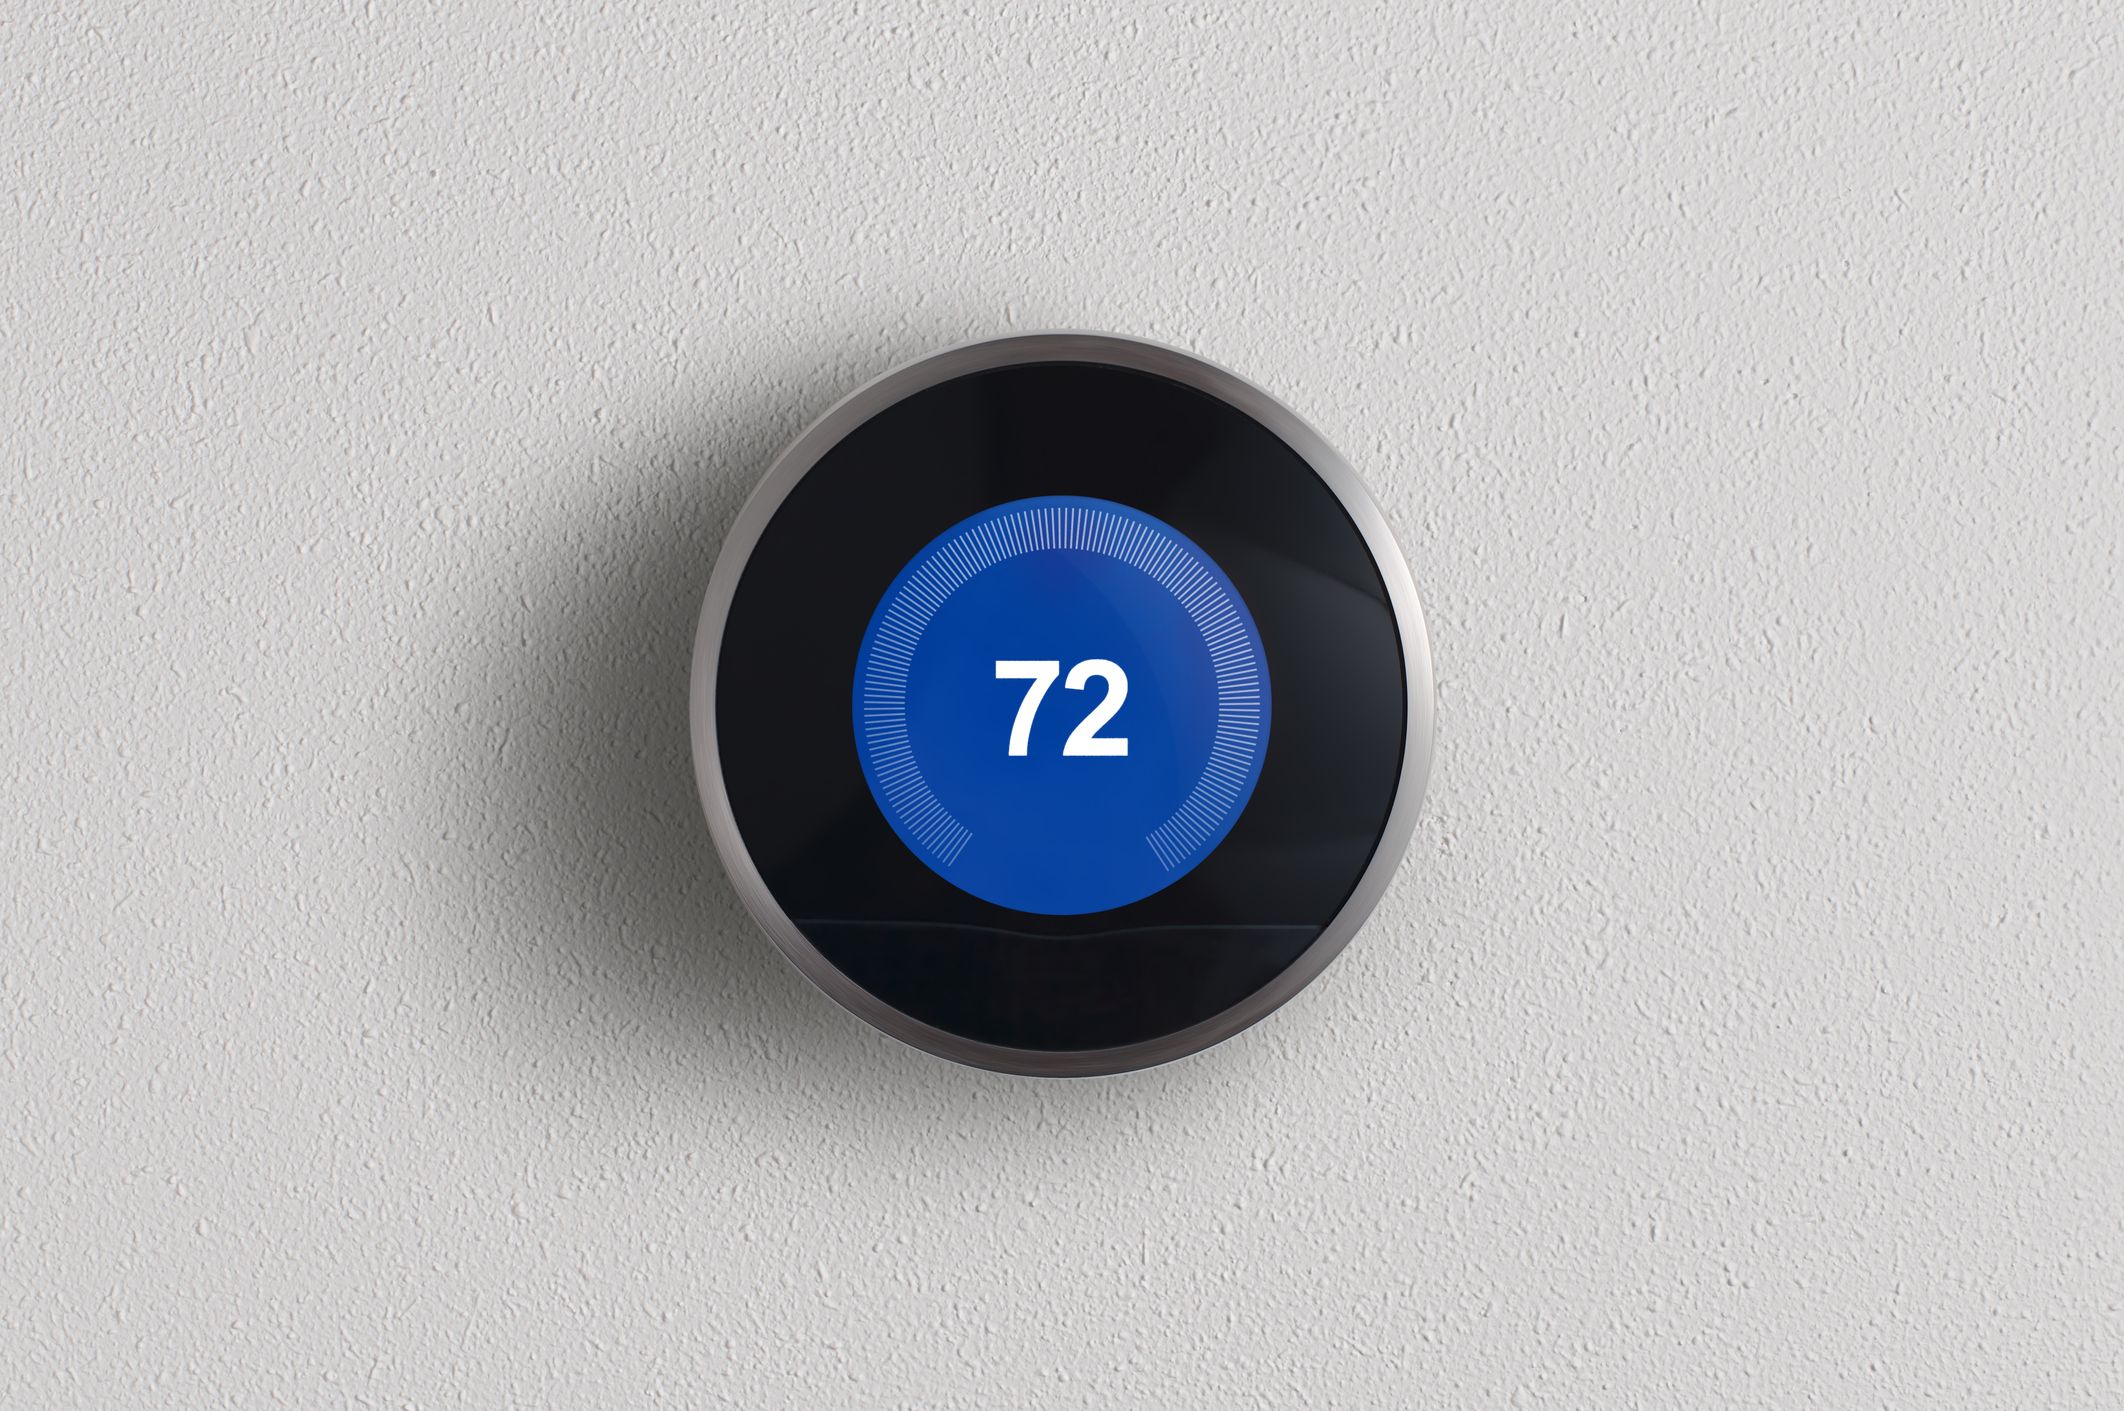 Feel Like Your Thermostat is Wrong? Guide to Common Thermostat Problems